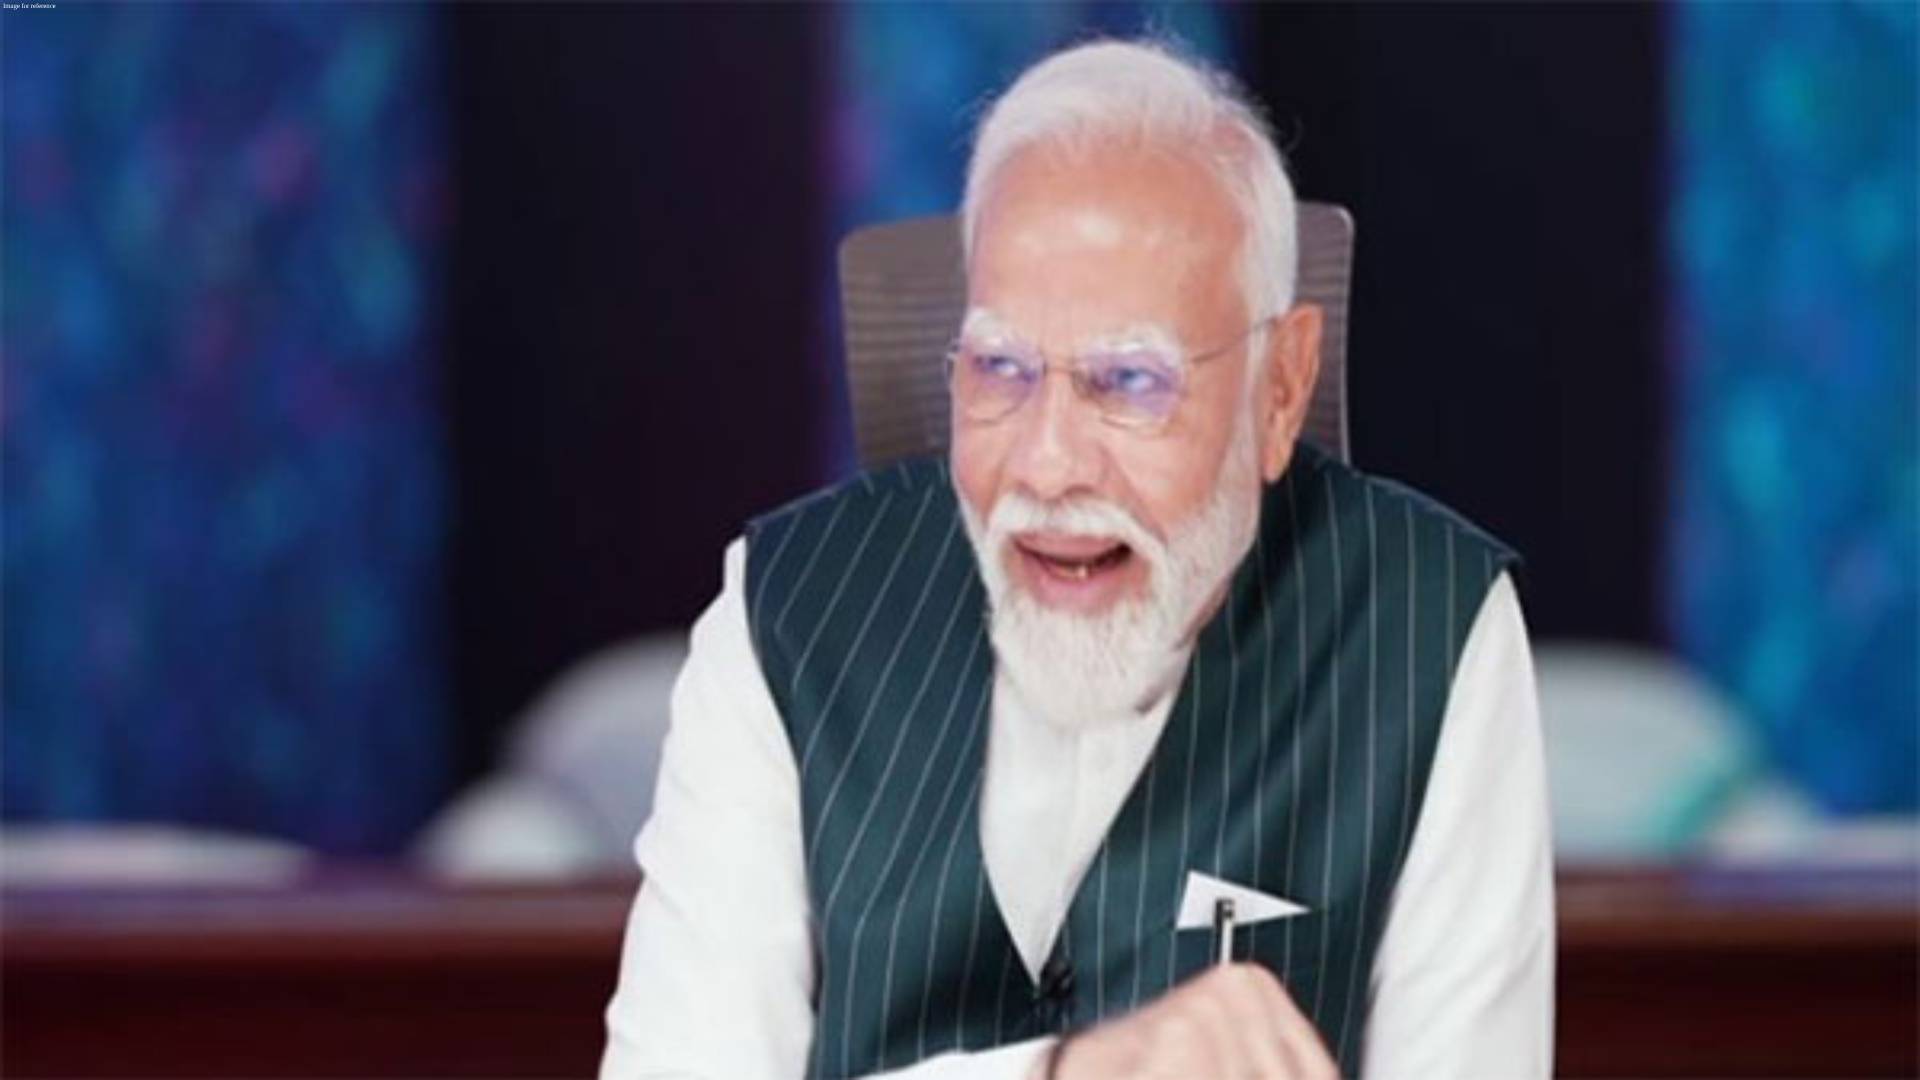 PM Modi interacts with gamers, says he would refrain from using 